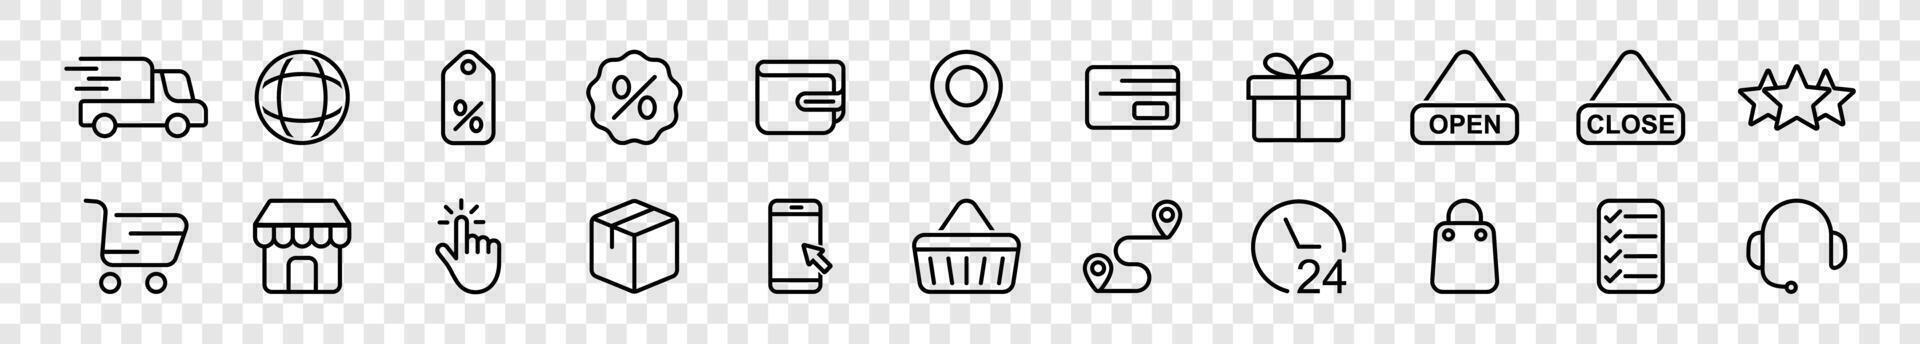 shopping line icons such as shopping bag, basket, discount, delivery, shop, location, payment, open, close, payment, wallet, package vector